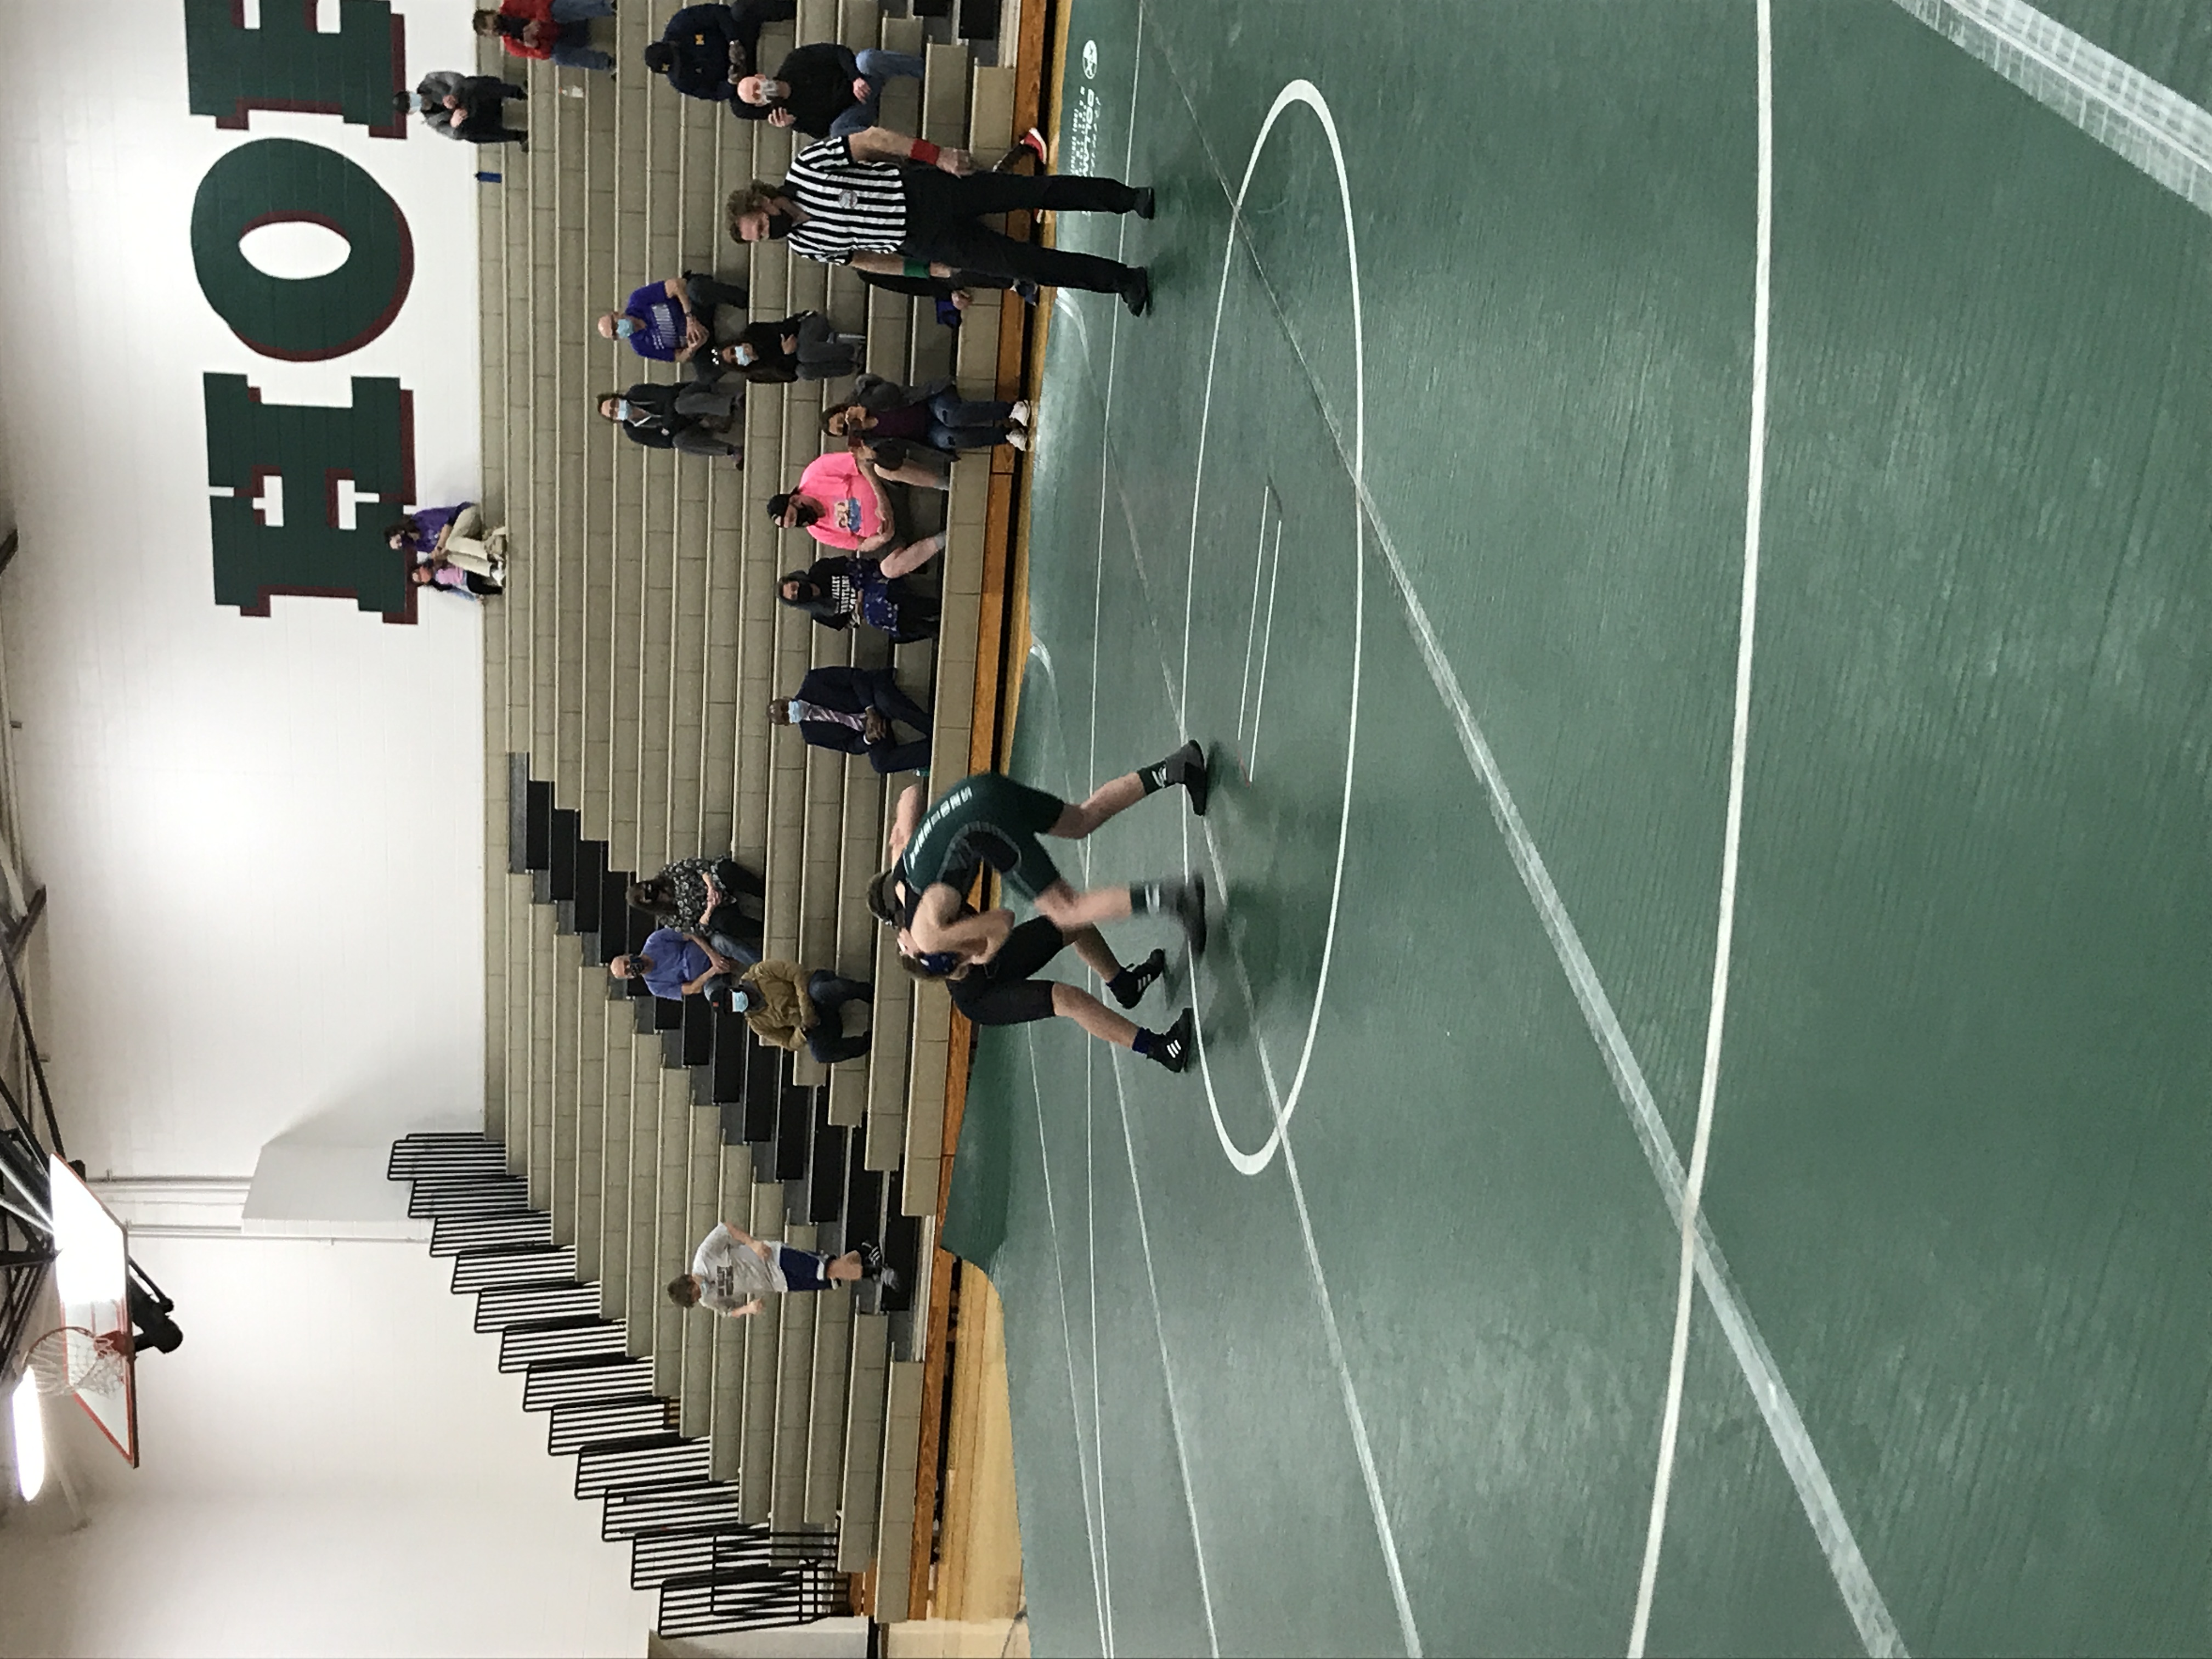 wrestlers on the mat